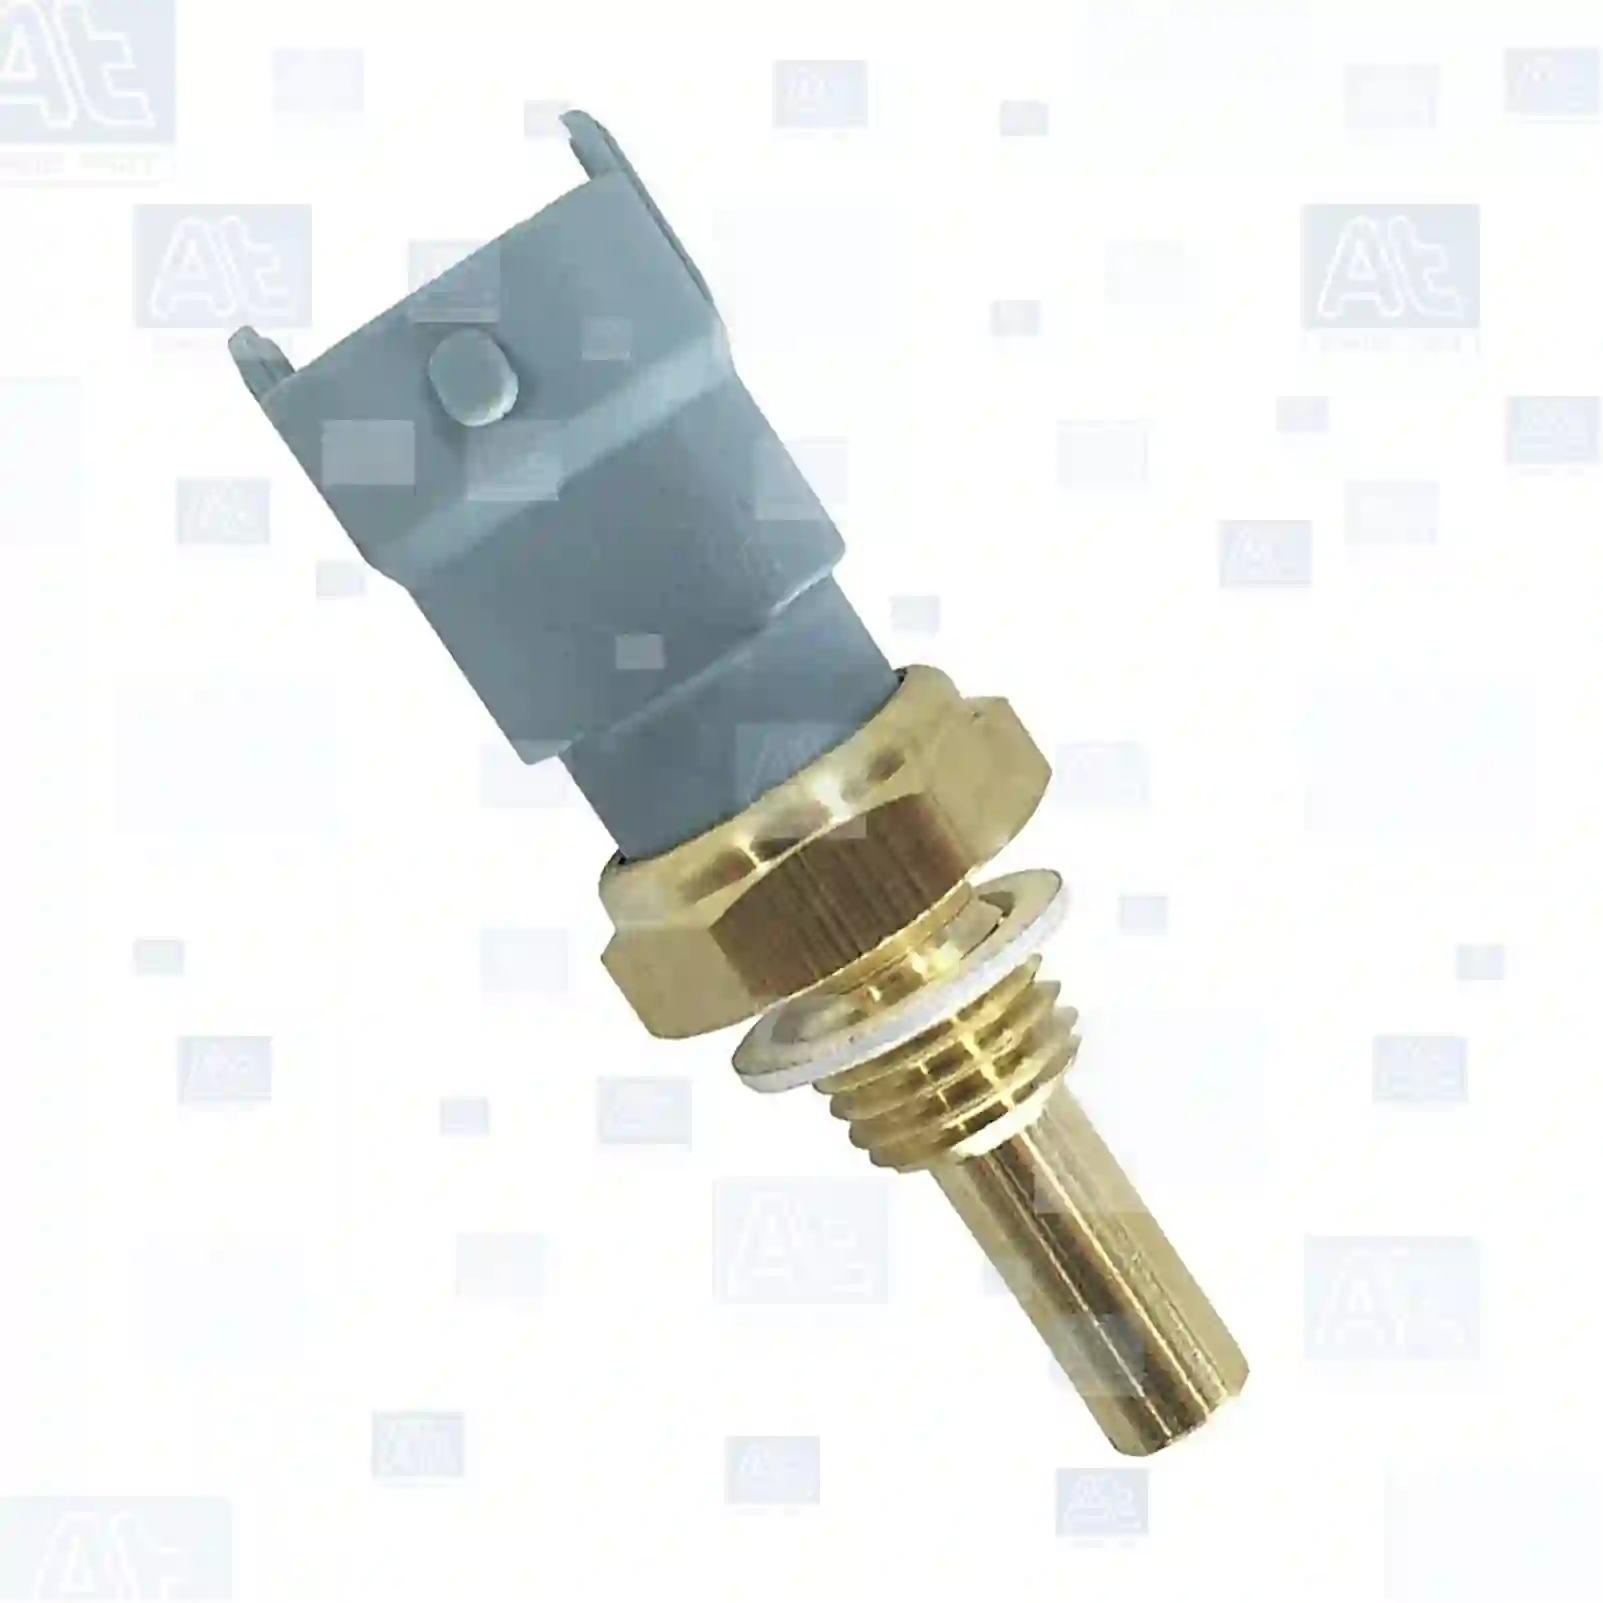 Temperature sensor, 77711383, 46462179, 46469865, 46472179, 500382599, 55187822, 60814175, 60814715, 71739856, 71741090, 99455420, 27712011, 360216055D, 3Z0963535, 12566778, 500382599, 82017881, 12566778, 12639899, 15393755, 24436779, 25183414, 55566146, 90541520, 90541937, 90542063, 90570185, 90570382, 91298691, 9193163, 9198691, 93174208, 93342219, 96868950, 97227219, 45962053F, 5066779AA, 00001338C7, 1338C7, 1338F9, 5010412450, 612630060035, 46472179, 500382599, 60814715, 71739856, 99455420, 07762299, 46462179, 46469865, 46472179, 500382599, 55187822, 60814175, 60814715, 71738956, 71739856, 71741090, 8972272190, 12566778, 12639899, 1338467, 1338511, 15336564, 15393755, 16240843, 25183414, 55566146, 55599958, 6235605, 6238179, 6238266, 6238422, 6238935, 6338486, 90490185, 90541520, 90541937, 90542063, 90570185, 90570382, 91298691, 9177213, 9193163, 9198691, 93174208, 93342219, 9542861, 9543406, 96868950, 97227219, 12628120, 90541937, 90541937, 37870-PLZ-D00, 37870-RBD-E01, 37870-RBD-E011, 37870-RDB-E01, 37870RBDE011M4, 8-97227219-0, 46469865, 46472179, 500382599, 5010412450, 60814715, 71739856, 5066779AA, 004510411110119088, 201149034, 04199809, 04213839, 46469865, 46472179, 500382599, 55187822, 60814175, 60814715, 71739856, 71741090, 99455420, 80891090, 03090C0071N, 961200690034, 82017881, 1338179, 1338357, 1338461, 1338467, 1338511, 1342567, 4660585, 4772307, 4773586, 4801922, 4818227, 6235605, 6238179, 6238266, 6238486, 6238935, 6338486, 00001338C7, 1338C7, 1338F9, 5001848546, 5010412450, 7020513340, 7420513340, 7421531072, 7485137860, 3Z0963535, PB107265PA, 12566778, 12639899, 15393755, 15398755, 24436779, 4660585, 4772208, 4772307, 4773586, 5341391, 55566146, 5959283, 90541937, 90542063, 90570185, 9177213, 9198691, 9542861, 9543406, 270990430, 90541937, 13650-78J00, 13650-78J00-000, 500382599, 20513340, 20153340, 20513340, 21531072, 93342220, 2R0919501B, 148661913003, 52767791110, ZG21107-0008 ||  77711383 At Spare Part | Engine, Accelerator Pedal, Camshaft, Connecting Rod, Crankcase, Crankshaft, Cylinder Head, Engine Suspension Mountings, Exhaust Manifold, Exhaust Gas Recirculation, Filter Kits, Flywheel Housing, General Overhaul Kits, Engine, Intake Manifold, Oil Cleaner, Oil Cooler, Oil Filter, Oil Pump, Oil Sump, Piston & Liner, Sensor & Switch, Timing Case, Turbocharger, Cooling System, Belt Tensioner, Coolant Filter, Coolant Pipe, Corrosion Prevention Agent, Drive, Expansion Tank, Fan, Intercooler, Monitors & Gauges, Radiator, Thermostat, V-Belt / Timing belt, Water Pump, Fuel System, Electronical Injector Unit, Feed Pump, Fuel Filter, cpl., Fuel Gauge Sender,  Fuel Line, Fuel Pump, Fuel Tank, Injection Line Kit, Injection Pump, Exhaust System, Clutch & Pedal, Gearbox, Propeller Shaft, Axles, Brake System, Hubs & Wheels, Suspension, Leaf Spring, Universal Parts / Accessories, Steering, Electrical System, Cabin Temperature sensor, 77711383, 46462179, 46469865, 46472179, 500382599, 55187822, 60814175, 60814715, 71739856, 71741090, 99455420, 27712011, 360216055D, 3Z0963535, 12566778, 500382599, 82017881, 12566778, 12639899, 15393755, 24436779, 25183414, 55566146, 90541520, 90541937, 90542063, 90570185, 90570382, 91298691, 9193163, 9198691, 93174208, 93342219, 96868950, 97227219, 45962053F, 5066779AA, 00001338C7, 1338C7, 1338F9, 5010412450, 612630060035, 46472179, 500382599, 60814715, 71739856, 99455420, 07762299, 46462179, 46469865, 46472179, 500382599, 55187822, 60814175, 60814715, 71738956, 71739856, 71741090, 8972272190, 12566778, 12639899, 1338467, 1338511, 15336564, 15393755, 16240843, 25183414, 55566146, 55599958, 6235605, 6238179, 6238266, 6238422, 6238935, 6338486, 90490185, 90541520, 90541937, 90542063, 90570185, 90570382, 91298691, 9177213, 9193163, 9198691, 93174208, 93342219, 9542861, 9543406, 96868950, 97227219, 12628120, 90541937, 90541937, 37870-PLZ-D00, 37870-RBD-E01, 37870-RBD-E011, 37870-RDB-E01, 37870RBDE011M4, 8-97227219-0, 46469865, 46472179, 500382599, 5010412450, 60814715, 71739856, 5066779AA, 004510411110119088, 201149034, 04199809, 04213839, 46469865, 46472179, 500382599, 55187822, 60814175, 60814715, 71739856, 71741090, 99455420, 80891090, 03090C0071N, 961200690034, 82017881, 1338179, 1338357, 1338461, 1338467, 1338511, 1342567, 4660585, 4772307, 4773586, 4801922, 4818227, 6235605, 6238179, 6238266, 6238486, 6238935, 6338486, 00001338C7, 1338C7, 1338F9, 5001848546, 5010412450, 7020513340, 7420513340, 7421531072, 7485137860, 3Z0963535, PB107265PA, 12566778, 12639899, 15393755, 15398755, 24436779, 4660585, 4772208, 4772307, 4773586, 5341391, 55566146, 5959283, 90541937, 90542063, 90570185, 9177213, 9198691, 9542861, 9543406, 270990430, 90541937, 13650-78J00, 13650-78J00-000, 500382599, 20513340, 20153340, 20513340, 21531072, 93342220, 2R0919501B, 148661913003, 52767791110, ZG21107-0008 ||  77711383 At Spare Part | Engine, Accelerator Pedal, Camshaft, Connecting Rod, Crankcase, Crankshaft, Cylinder Head, Engine Suspension Mountings, Exhaust Manifold, Exhaust Gas Recirculation, Filter Kits, Flywheel Housing, General Overhaul Kits, Engine, Intake Manifold, Oil Cleaner, Oil Cooler, Oil Filter, Oil Pump, Oil Sump, Piston & Liner, Sensor & Switch, Timing Case, Turbocharger, Cooling System, Belt Tensioner, Coolant Filter, Coolant Pipe, Corrosion Prevention Agent, Drive, Expansion Tank, Fan, Intercooler, Monitors & Gauges, Radiator, Thermostat, V-Belt / Timing belt, Water Pump, Fuel System, Electronical Injector Unit, Feed Pump, Fuel Filter, cpl., Fuel Gauge Sender,  Fuel Line, Fuel Pump, Fuel Tank, Injection Line Kit, Injection Pump, Exhaust System, Clutch & Pedal, Gearbox, Propeller Shaft, Axles, Brake System, Hubs & Wheels, Suspension, Leaf Spring, Universal Parts / Accessories, Steering, Electrical System, Cabin